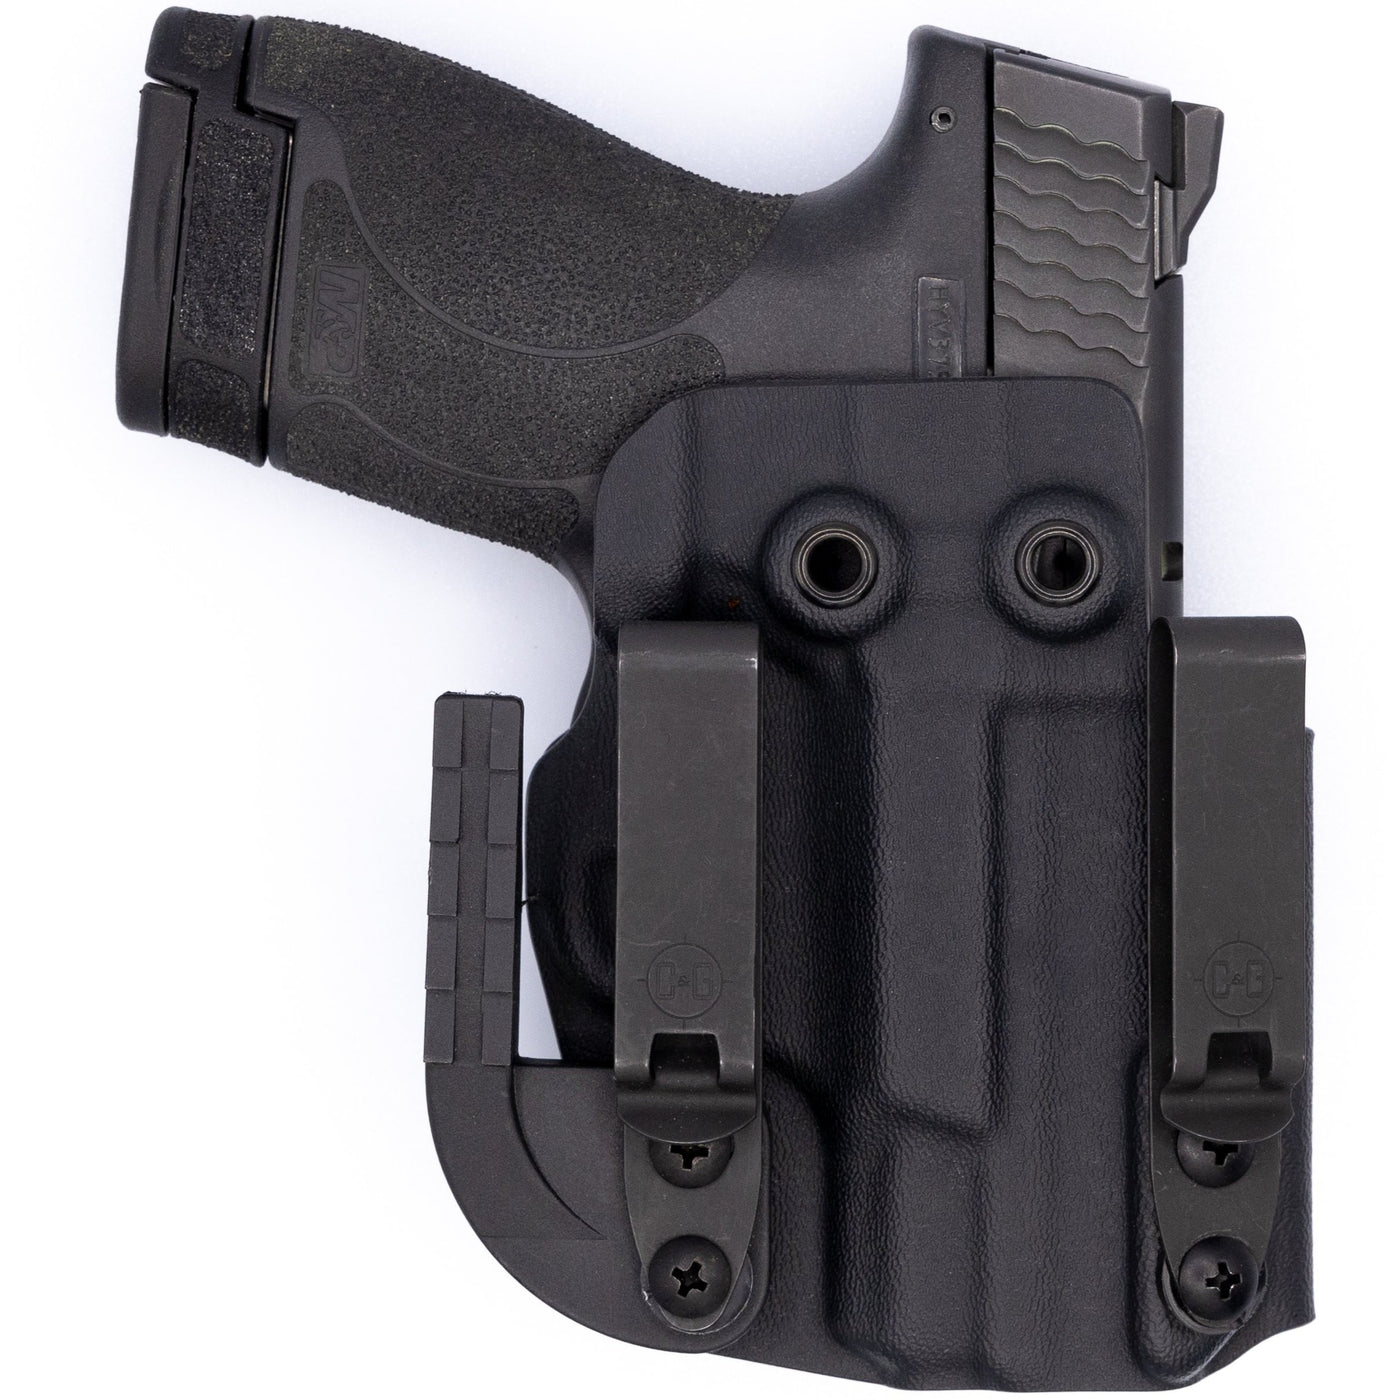 C&G Holsters custom Alpha IWB kydex holster for Smith & Wesson M&P Shield 9/40 in black